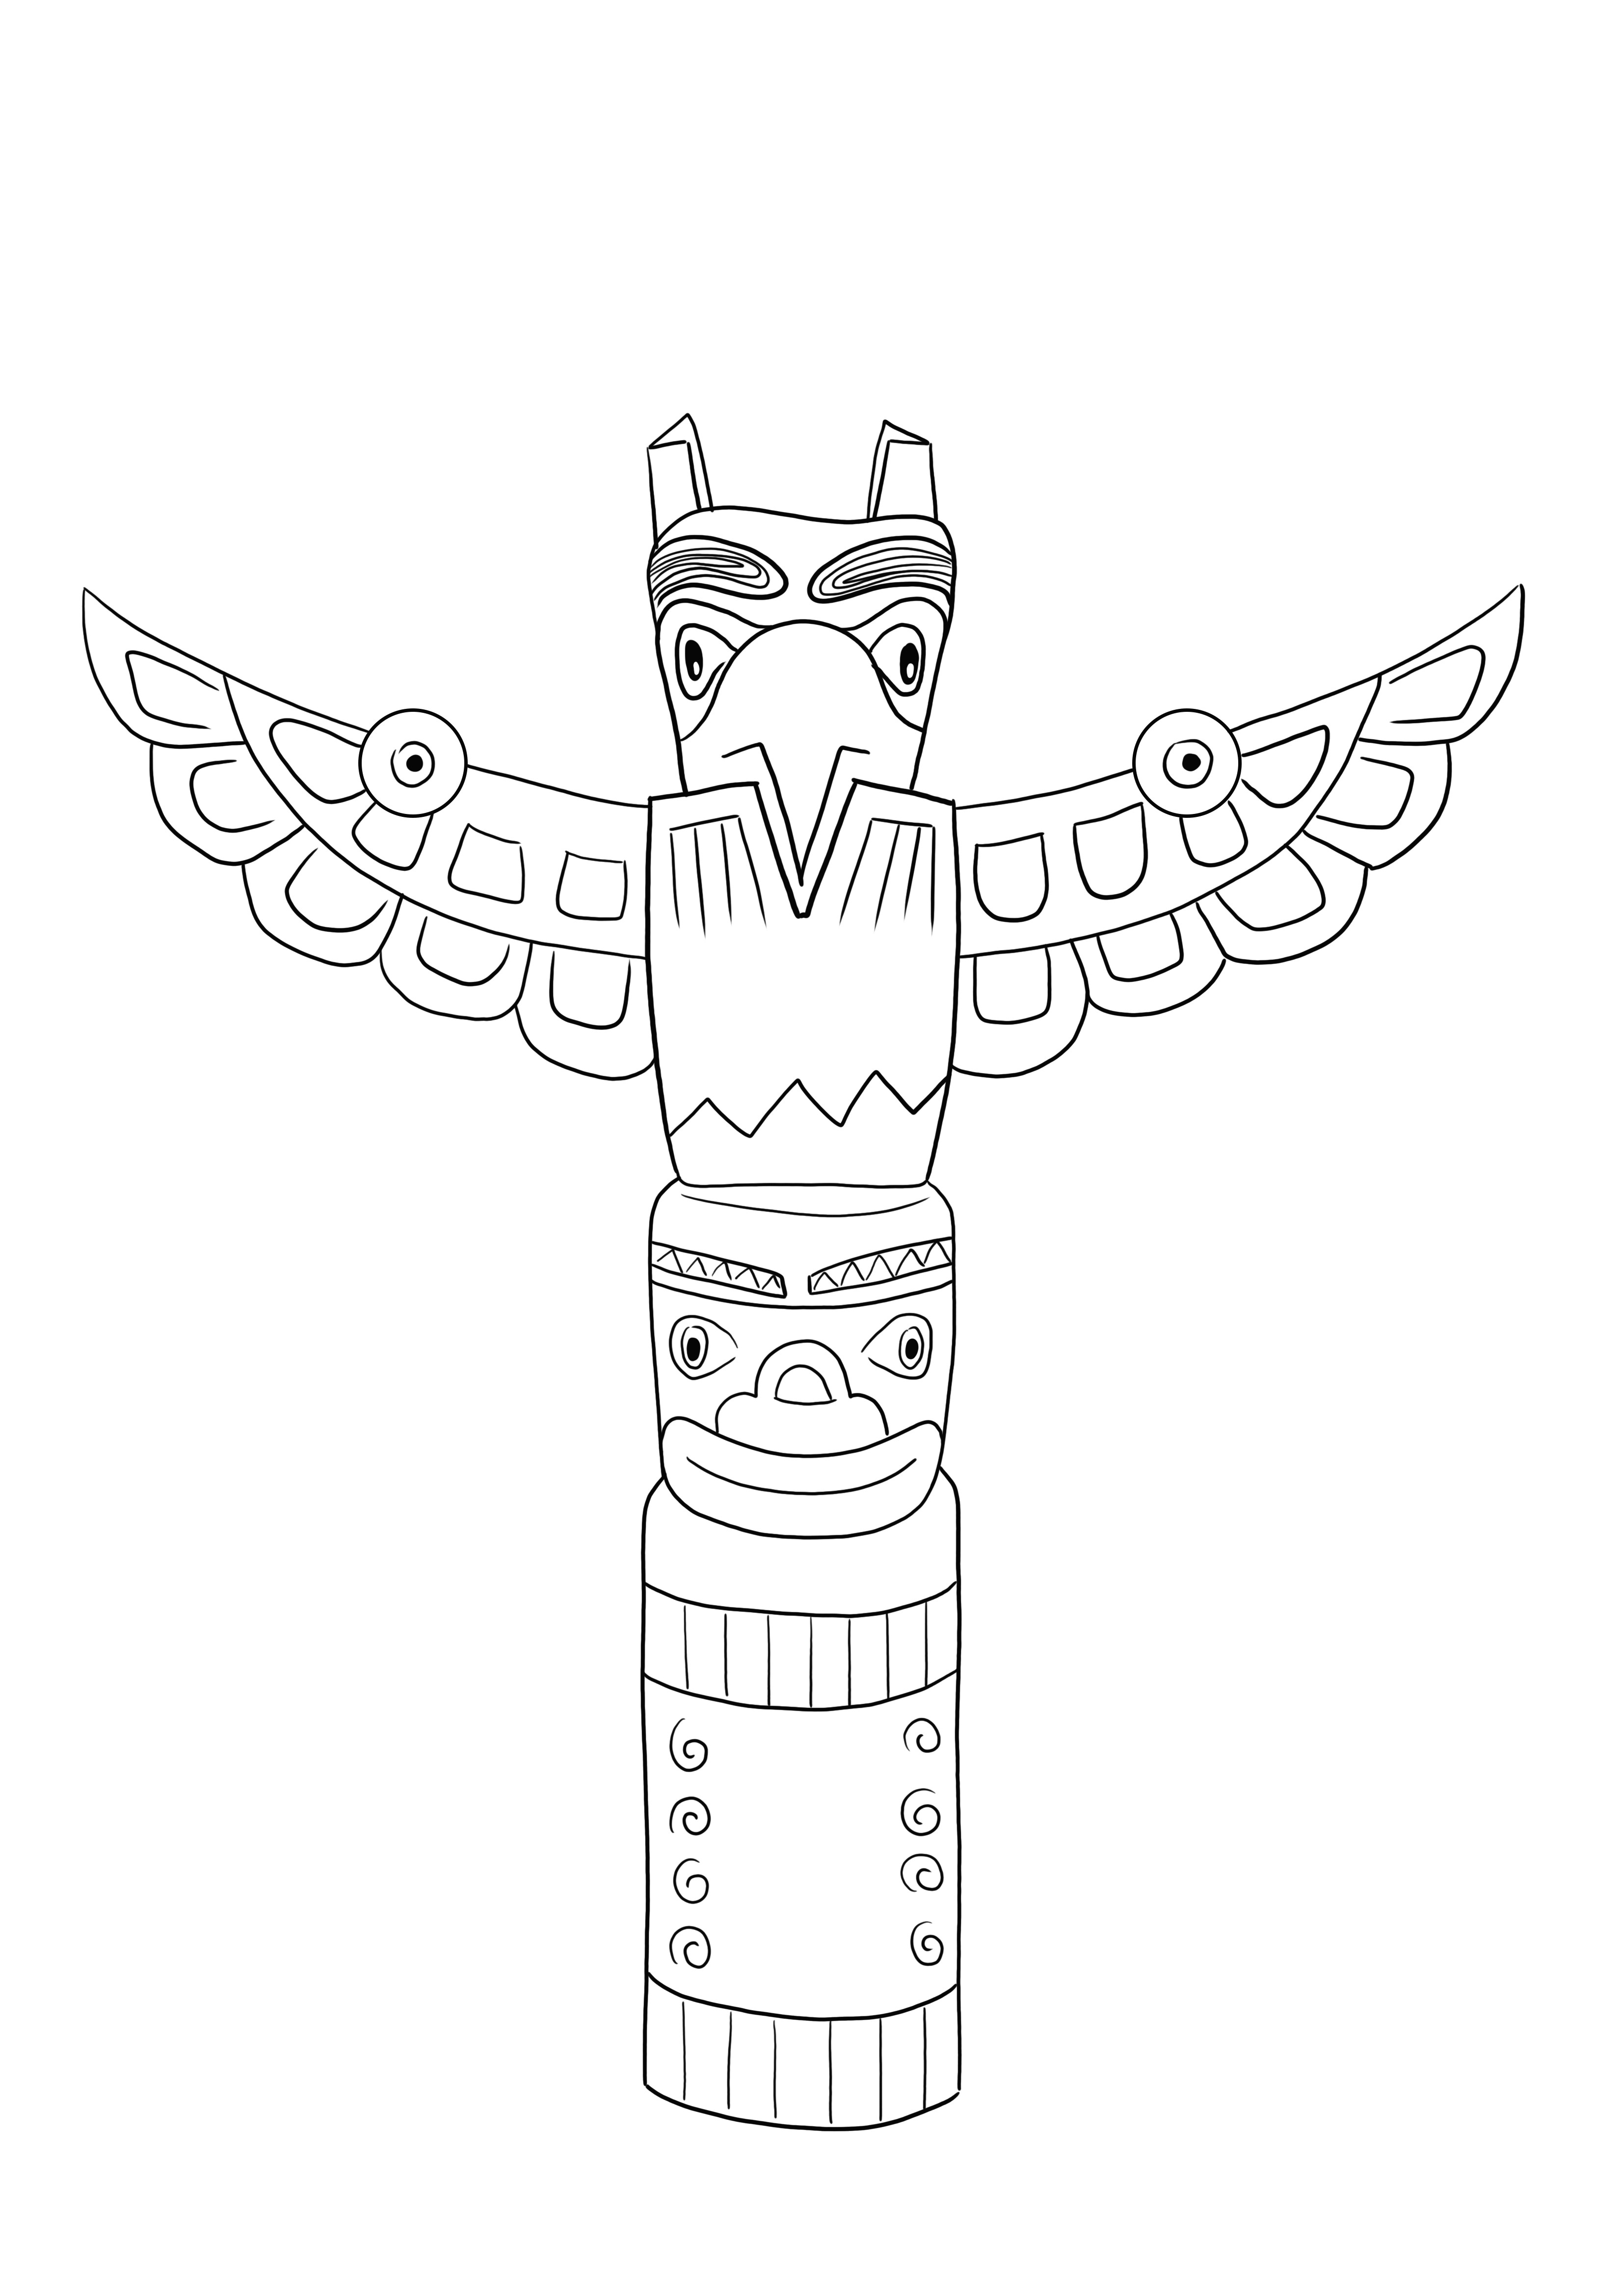 Free coloring of Totem Pole image to download or print for kids to learn about culture